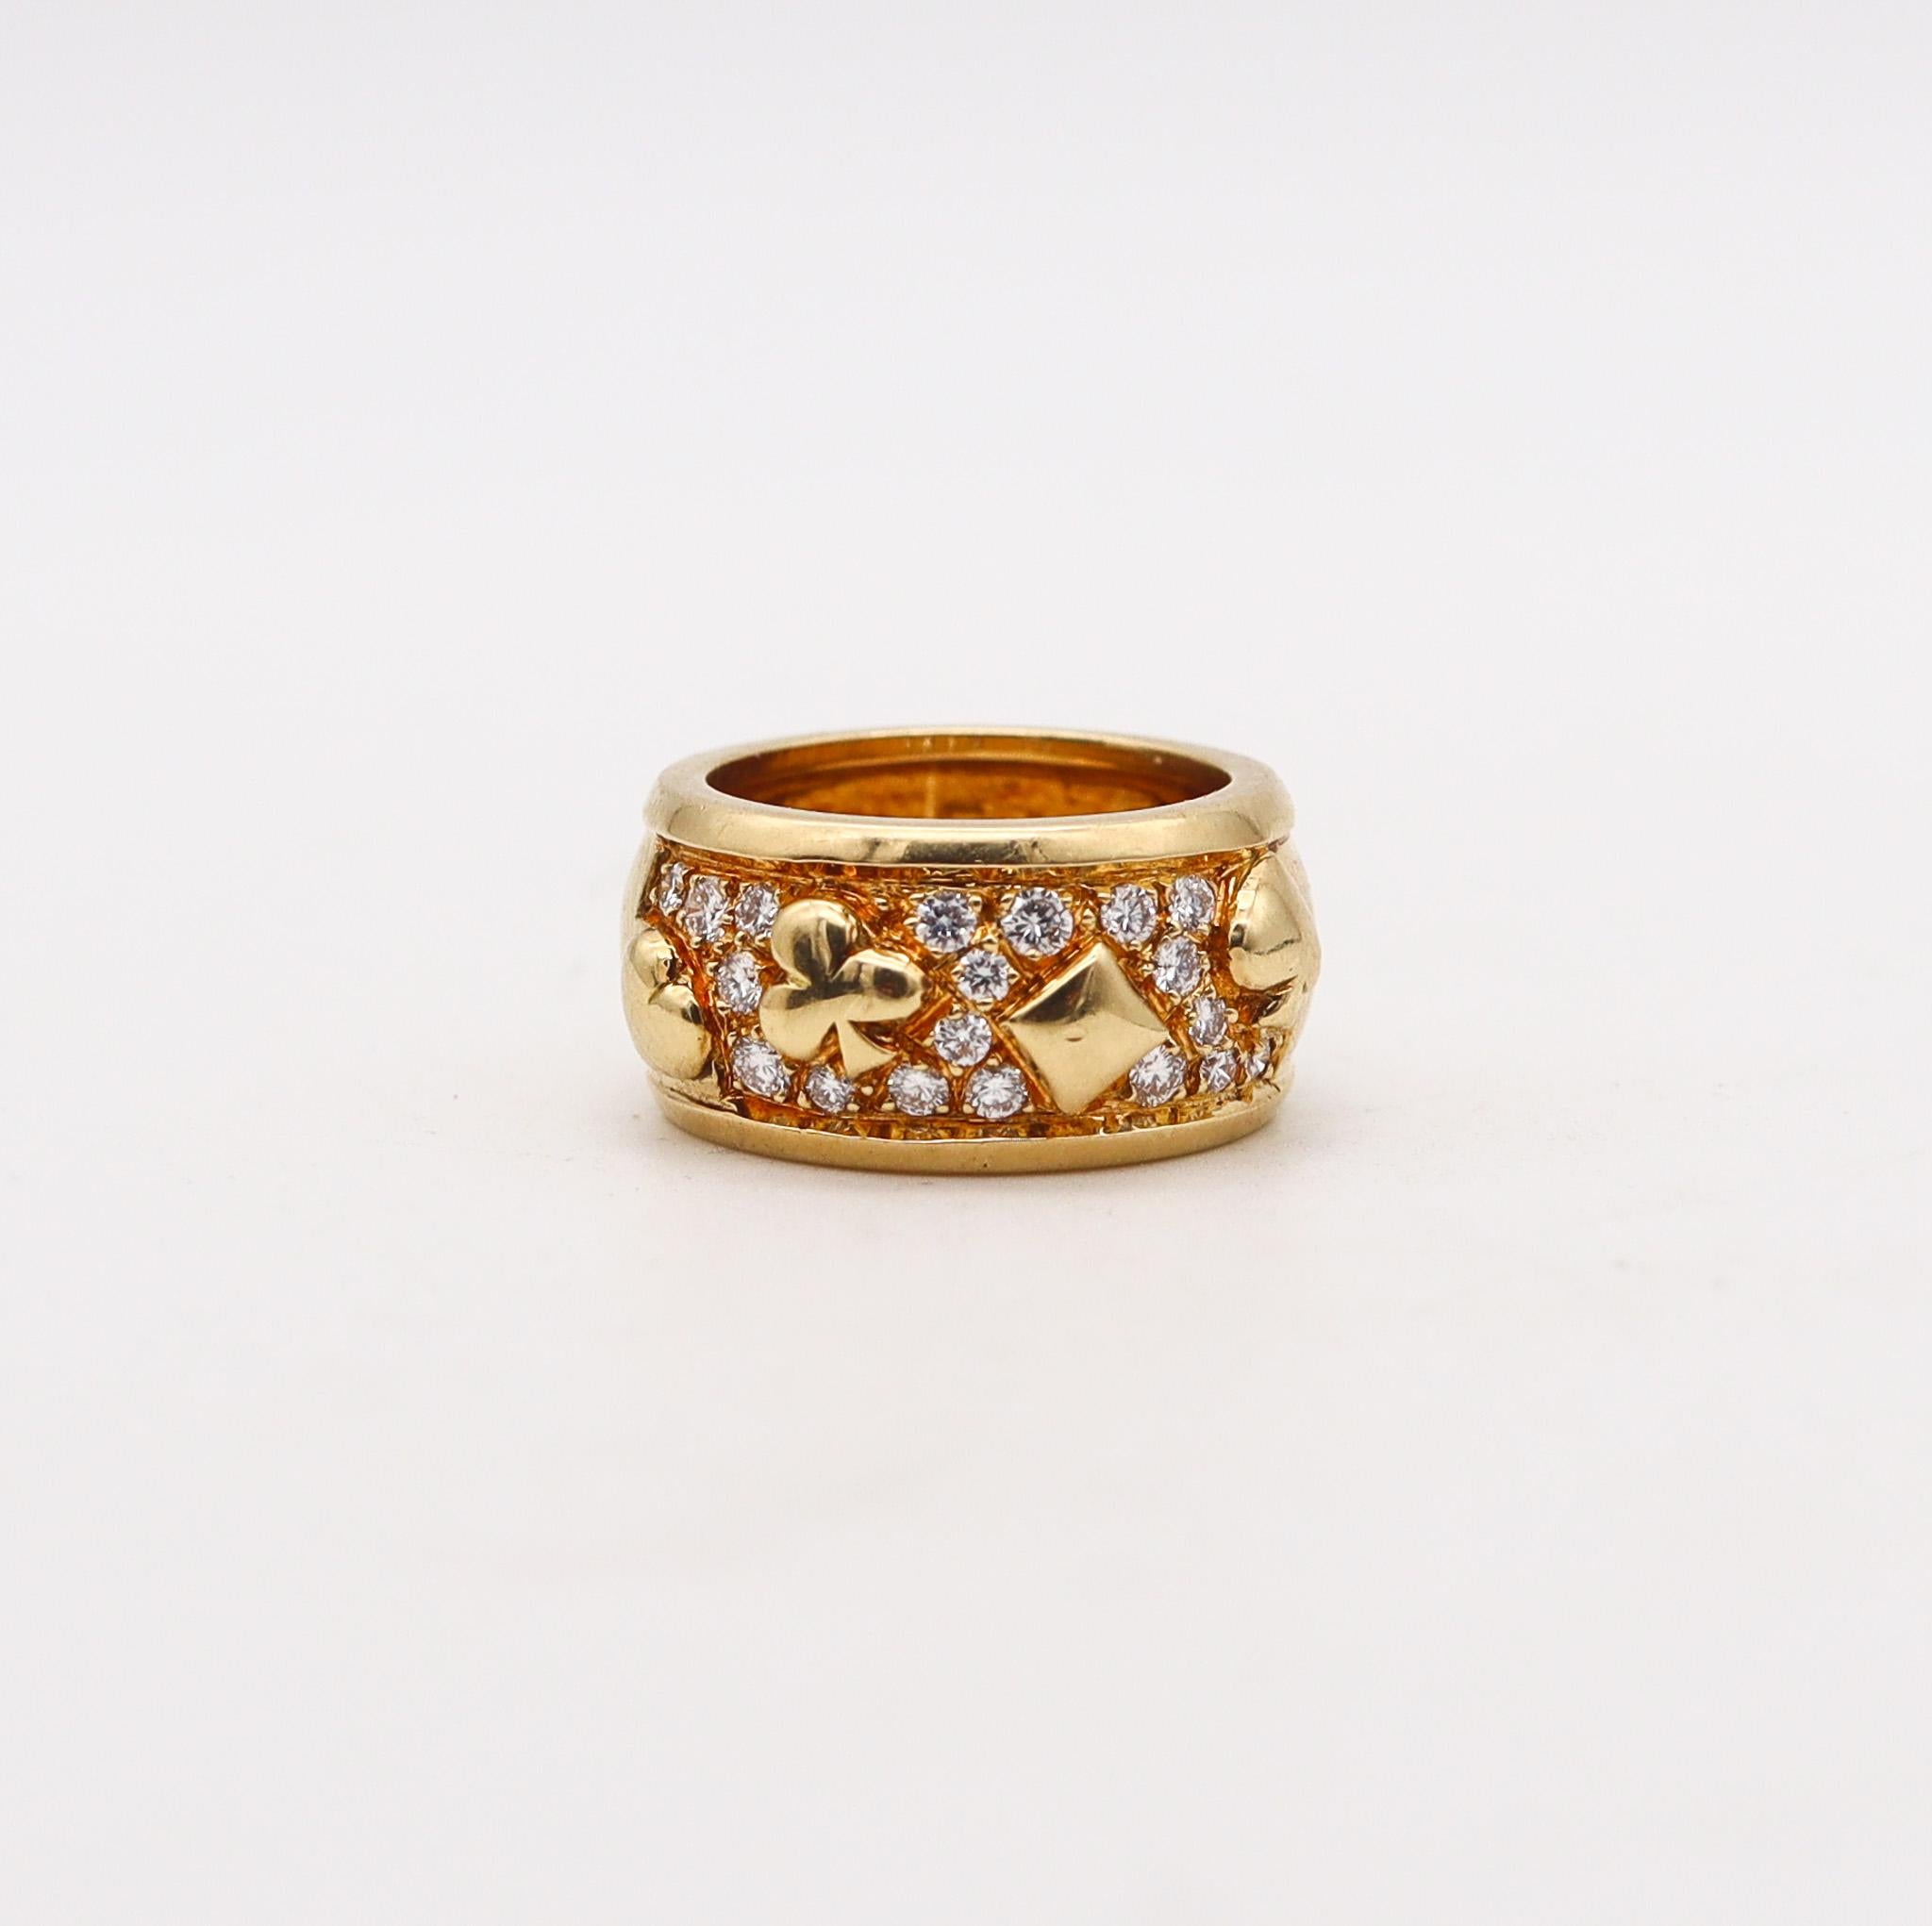 Casino ring band designed by Marchak Paris.

A beautiful ring, created in Paris France by the jewelry house of Marchak. This ring has been designed with very unusual Casino motifs, the design show the the four symbols of the deck of playing-cards.